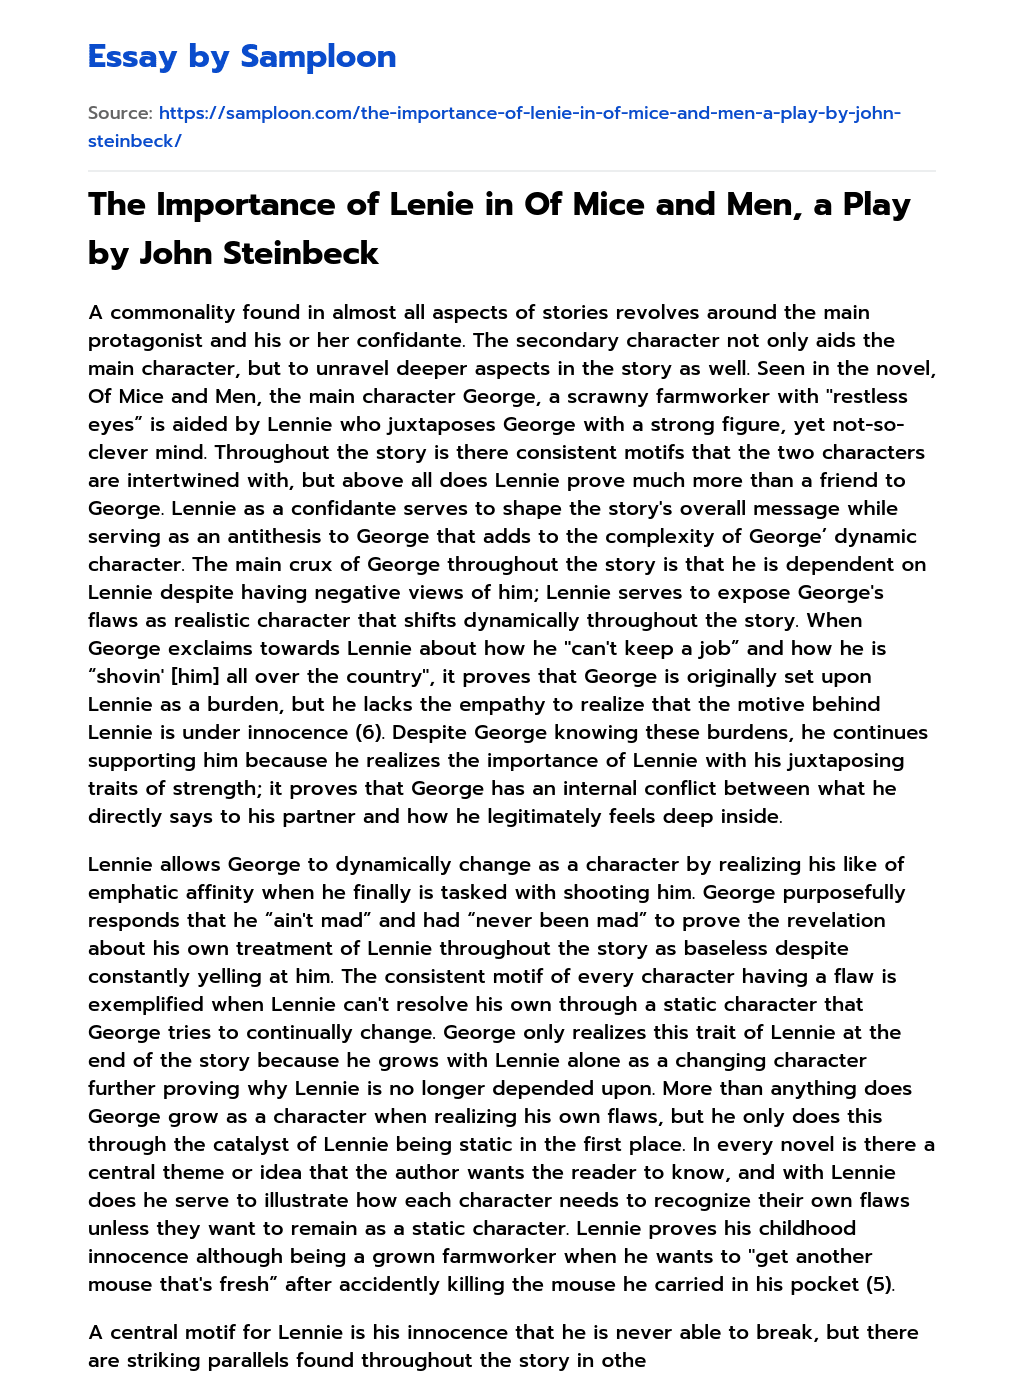 The Importance of Lenie in Of Mice and Men, a Play by John Steinbeck essay